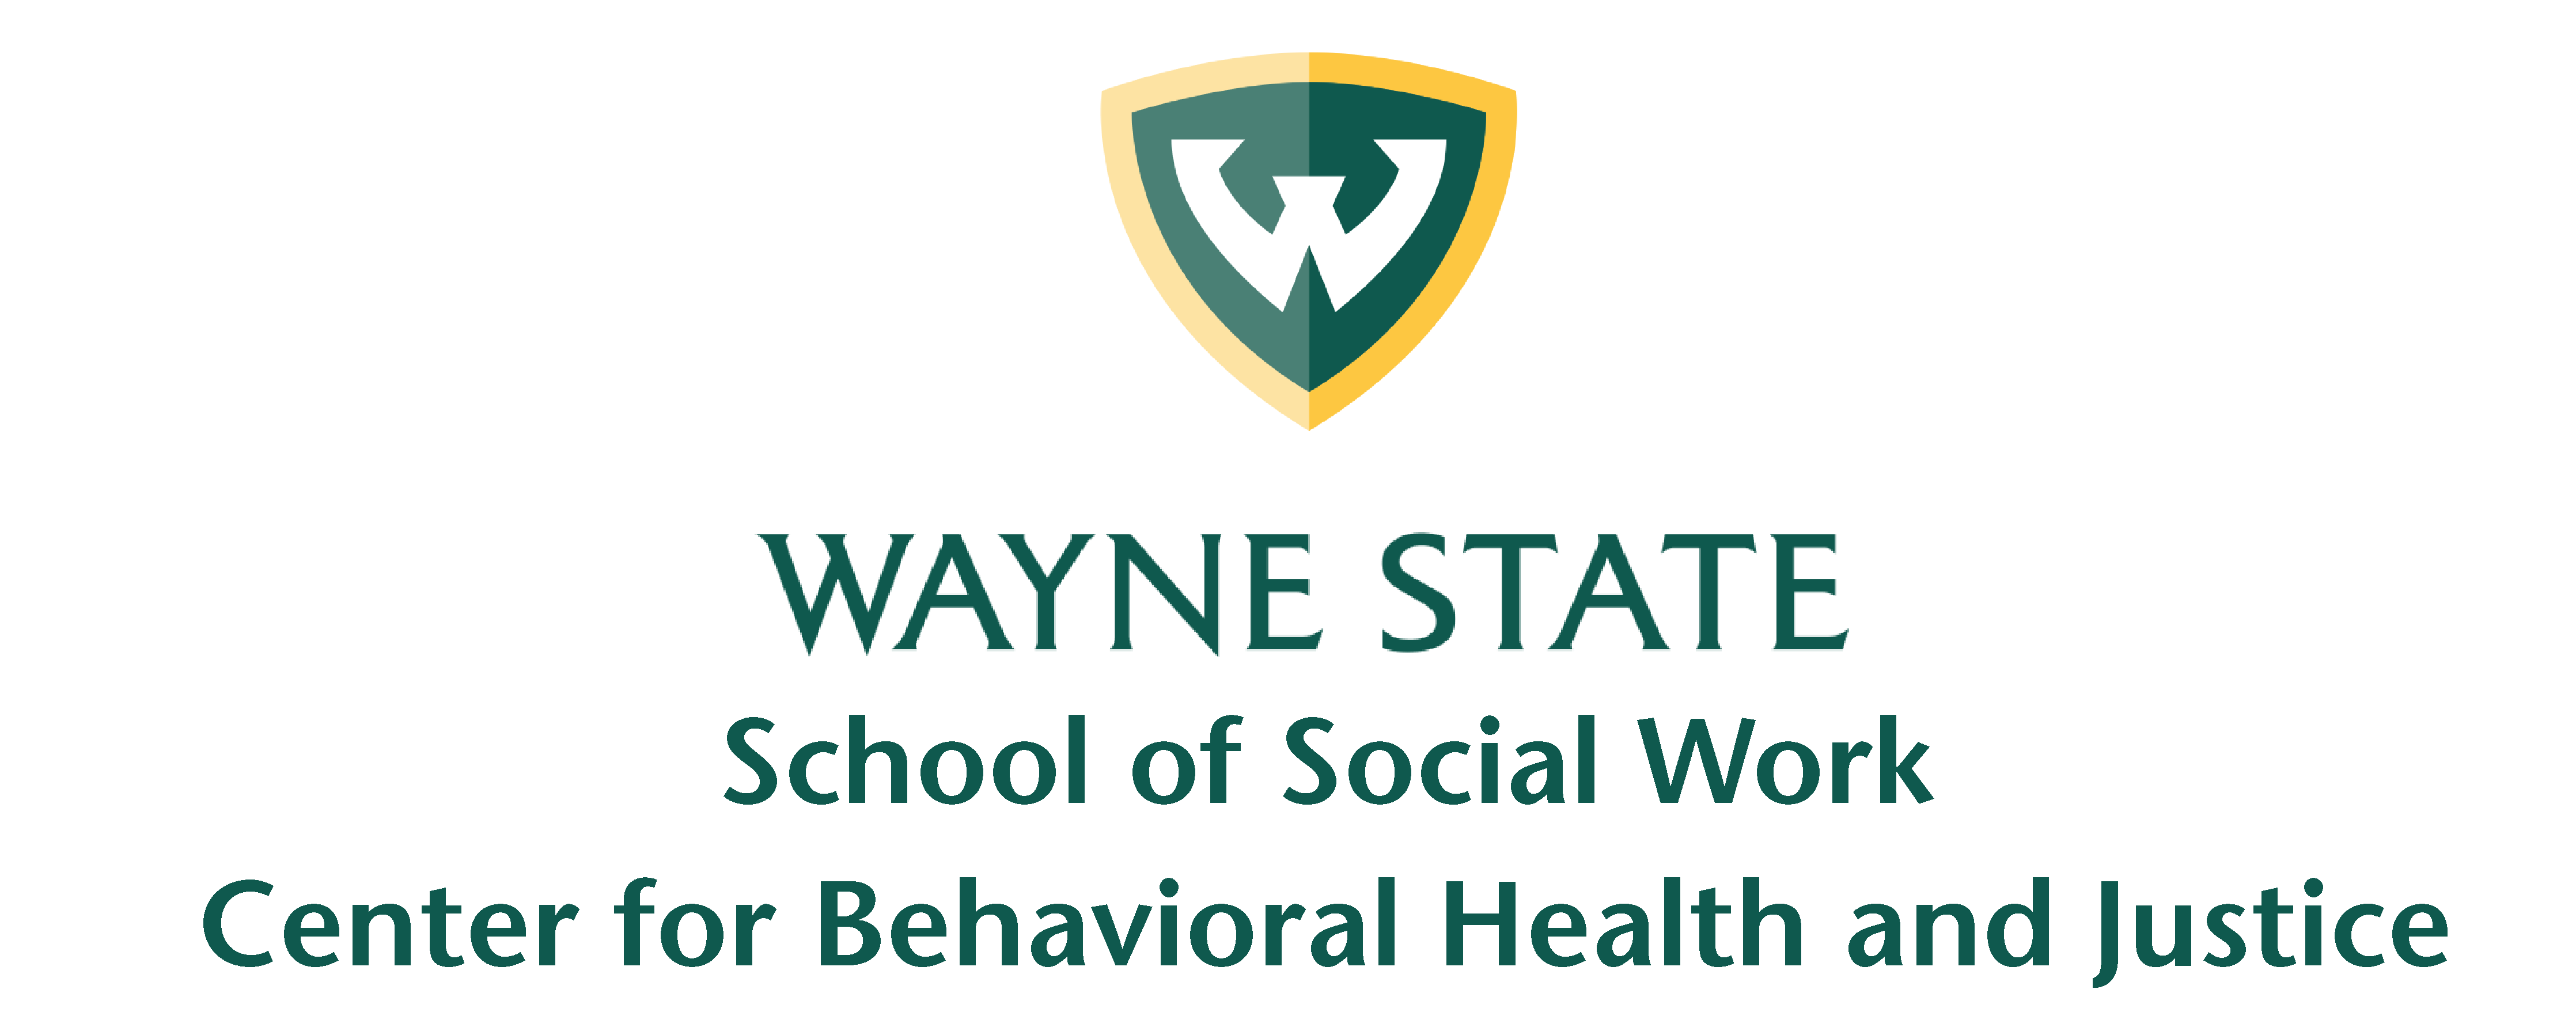 Center for Behavioral Health and Justice logo